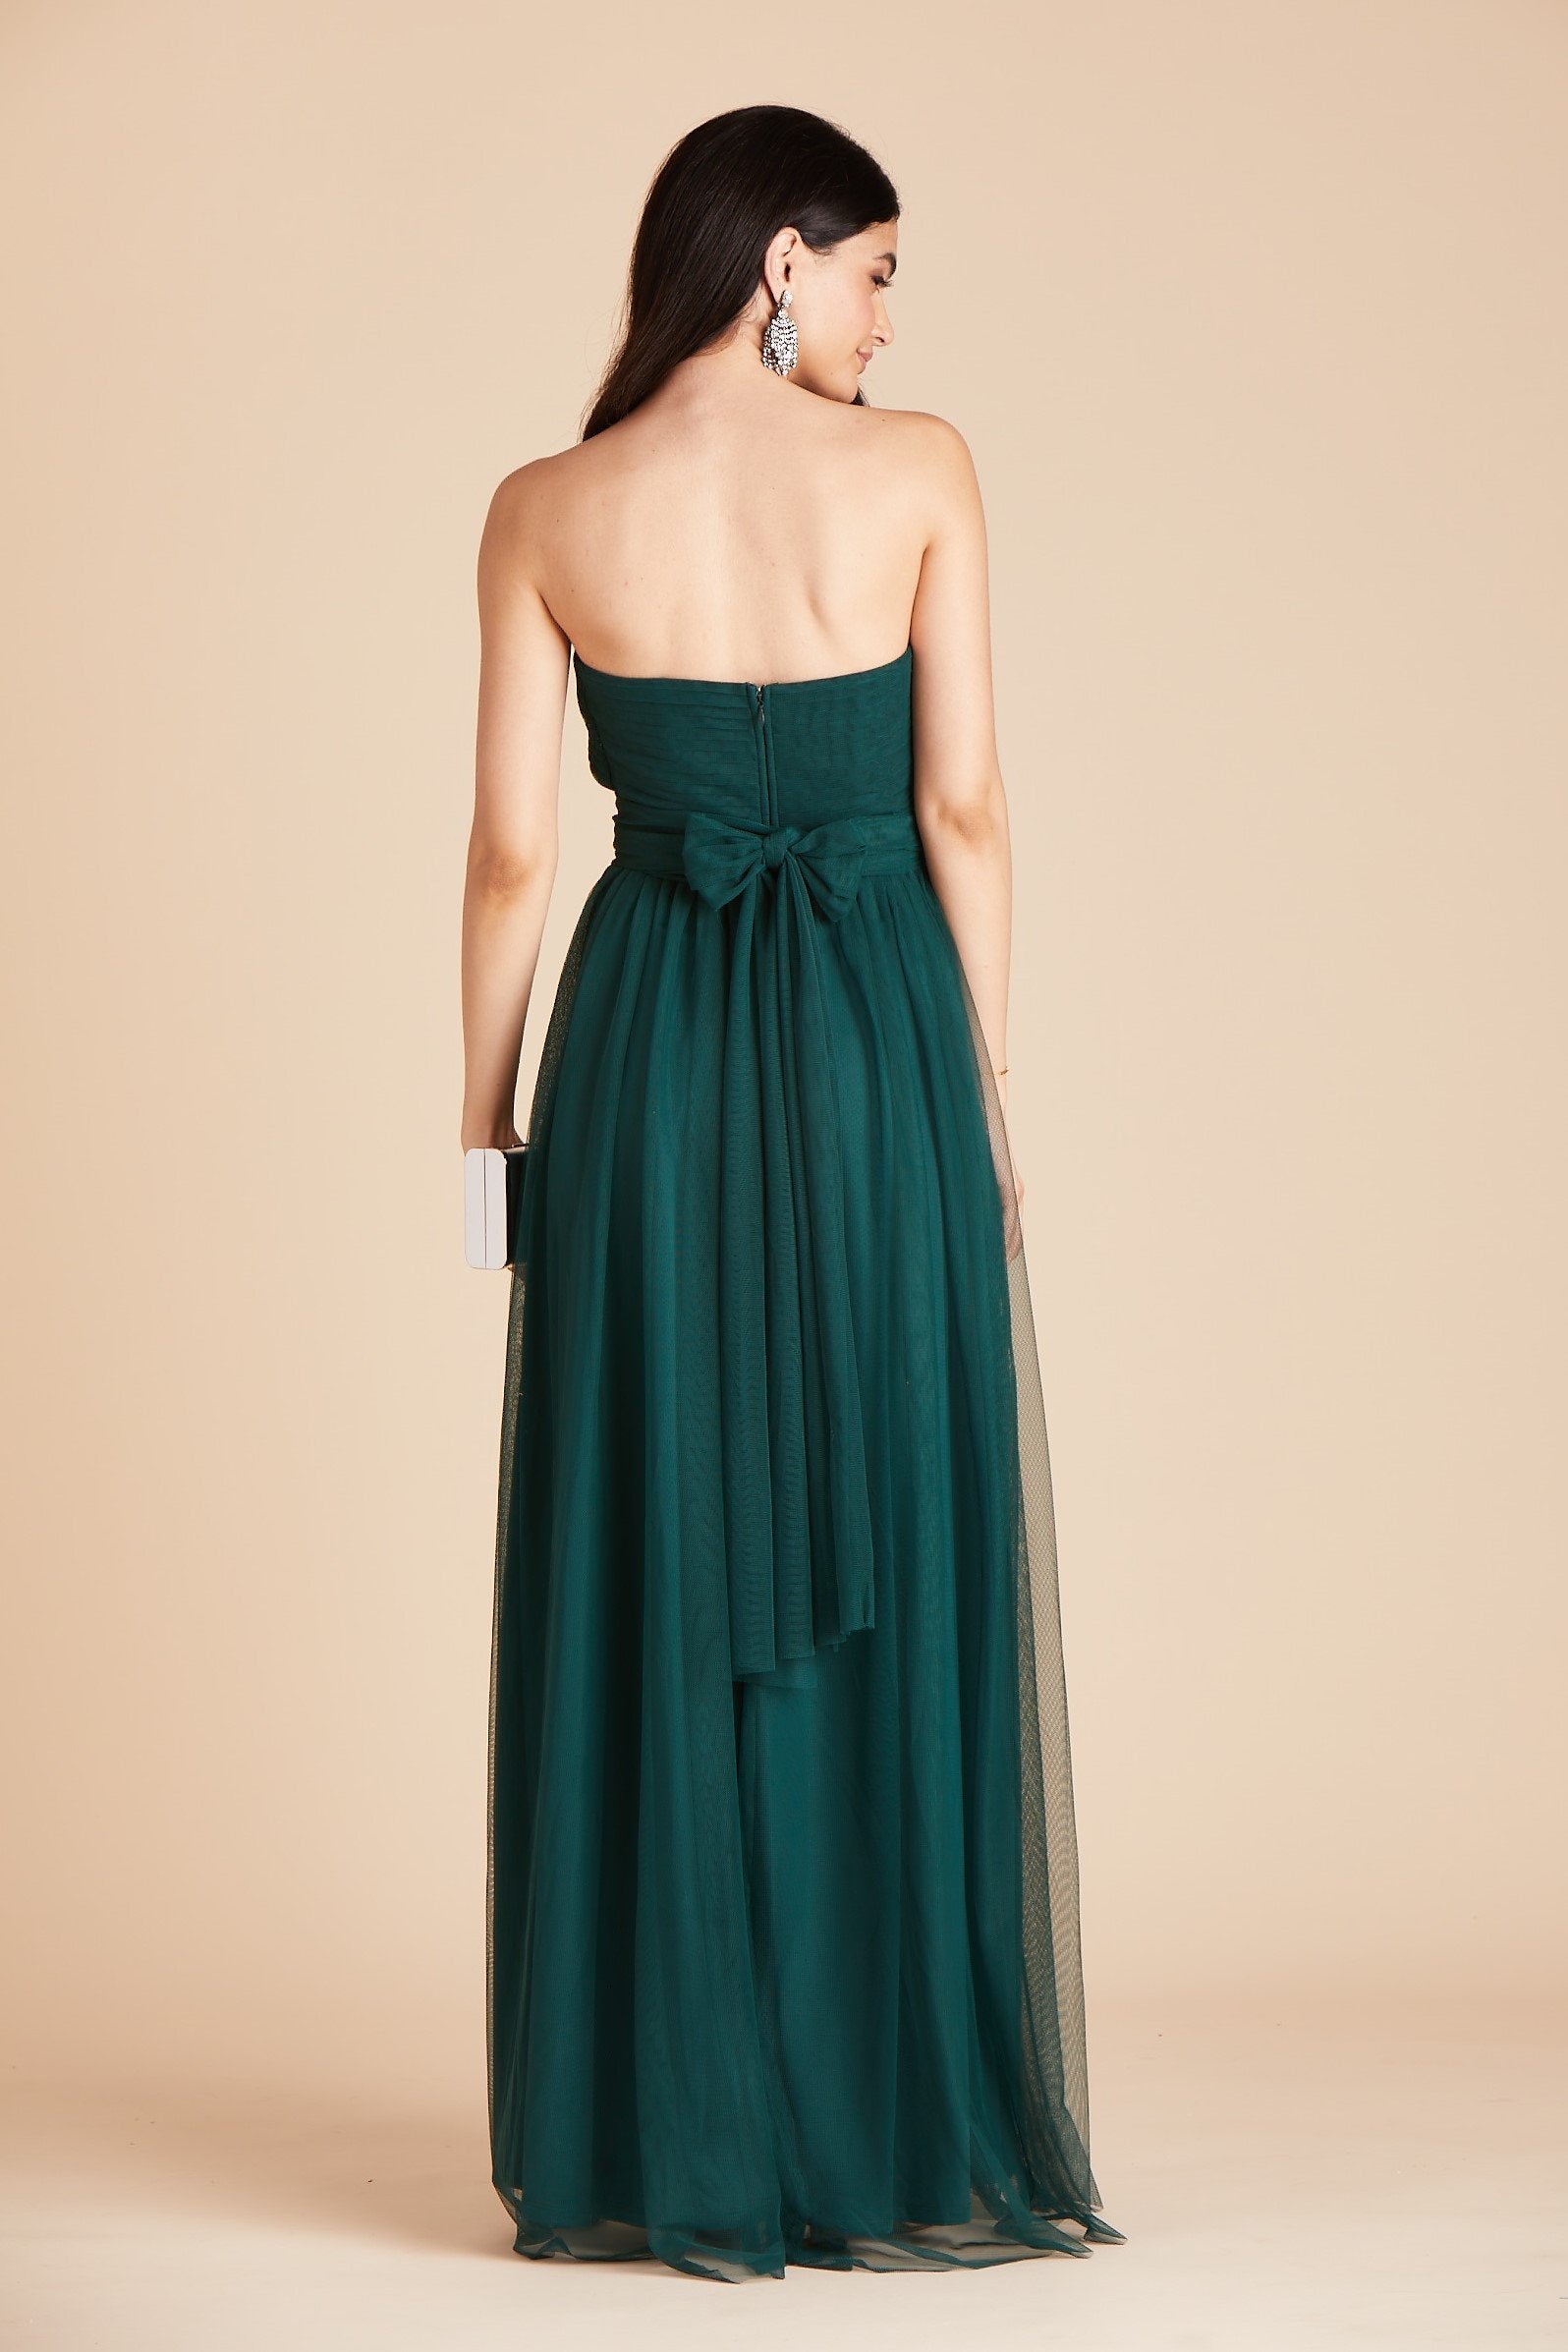 Christina convertible bridesmaid dress in emerald green tulle by Birdy Grey, back view